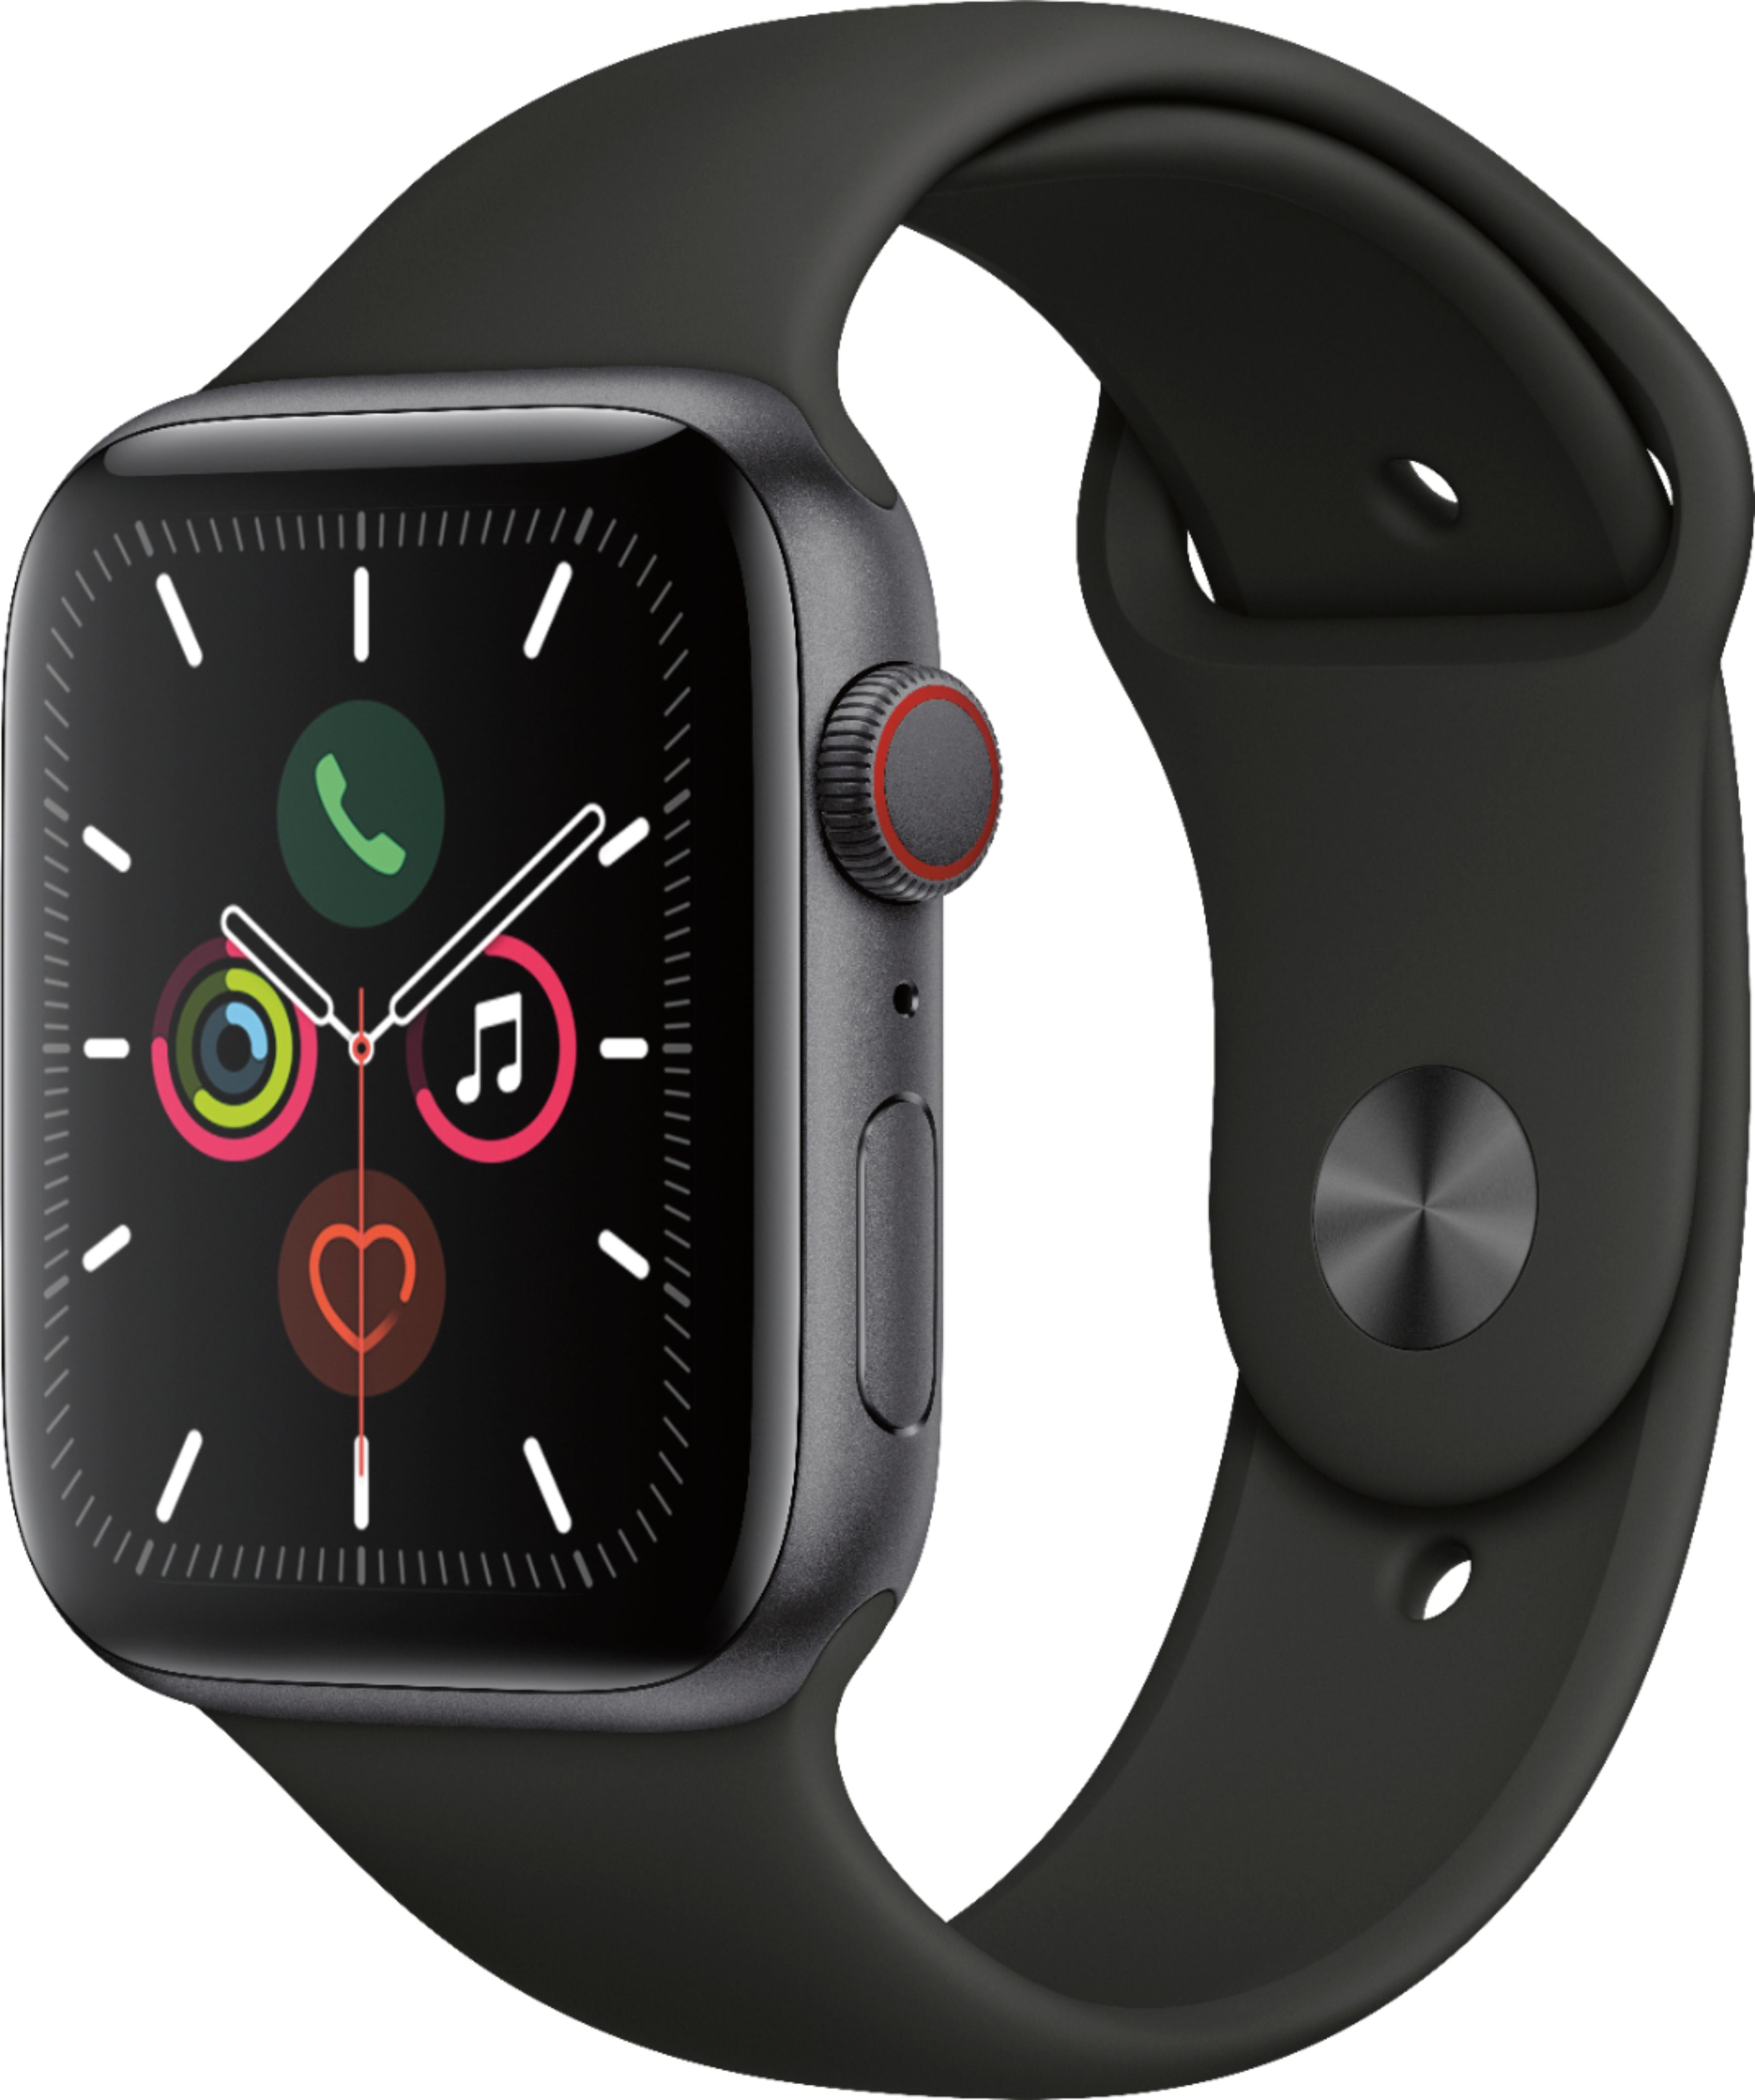 Apple Watch Series 5 (GPS + Cellular, 44mm) - Space Gray Aluminum Case with Black Sport Band